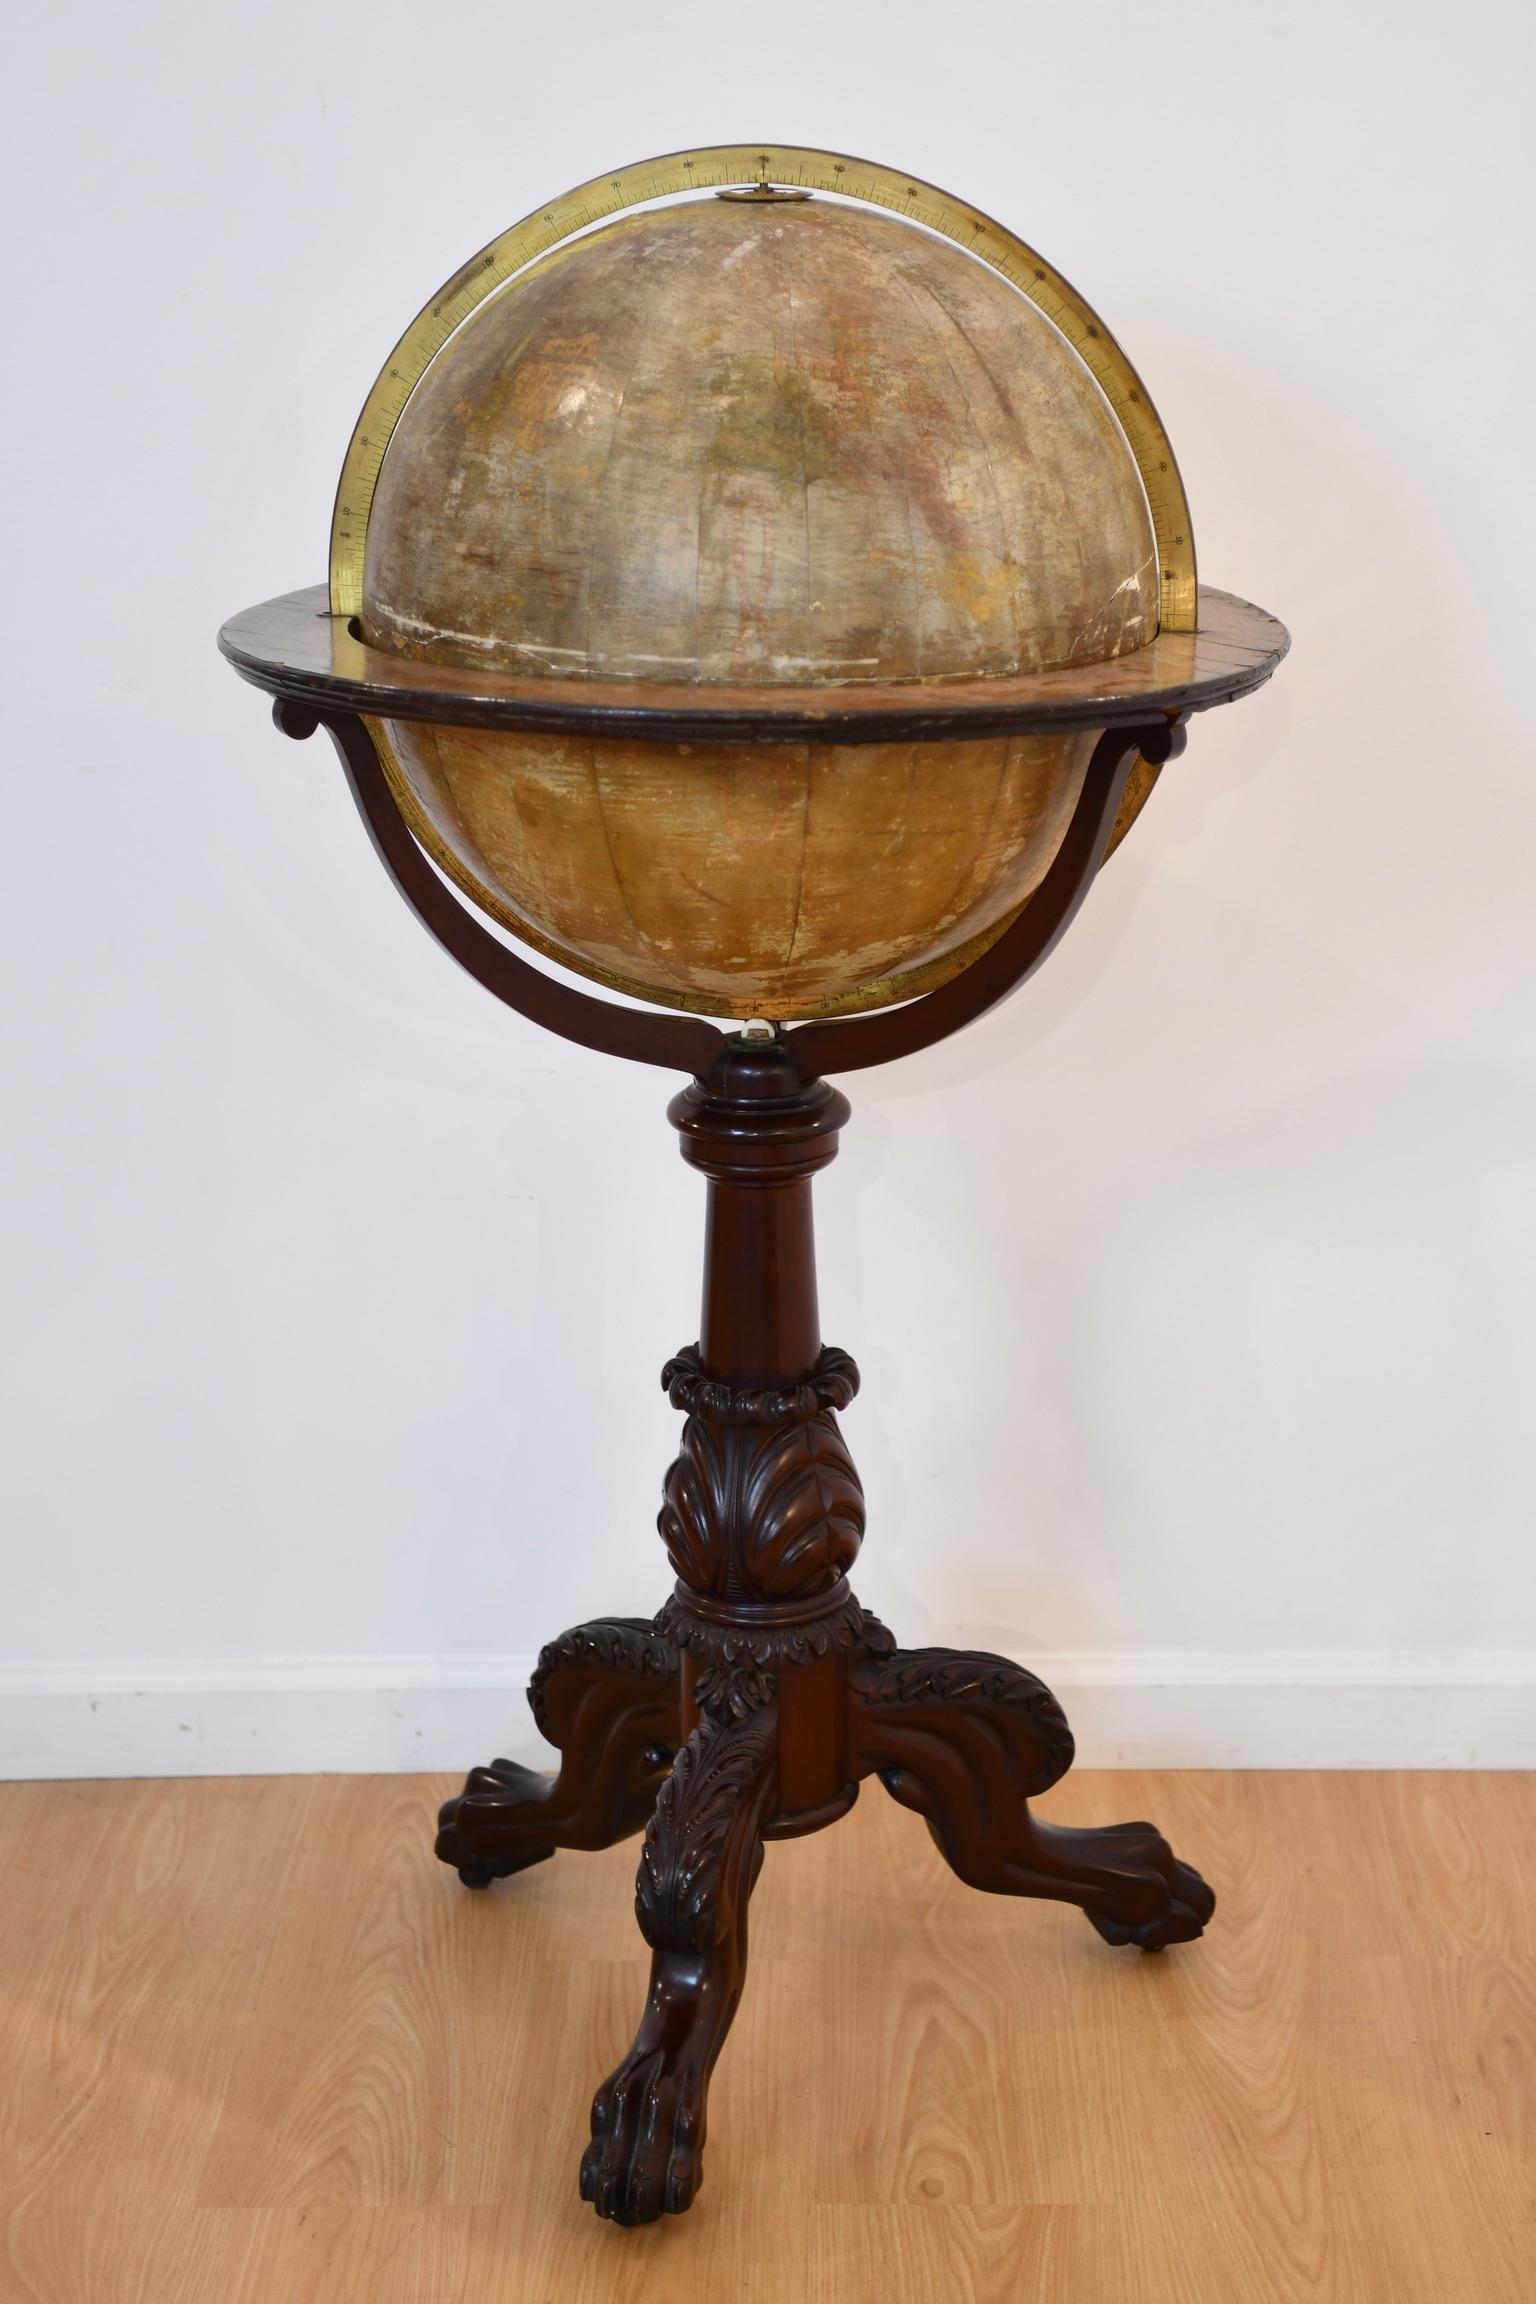 Terrestrial floor globe with a large cartouche to the Pacific Ocean, supported in a graduated brass meridian with a mahogany horizon band with paper zodiac and calendar. Globe raised on a carved classical revival mahogany tripod stand with acanthus